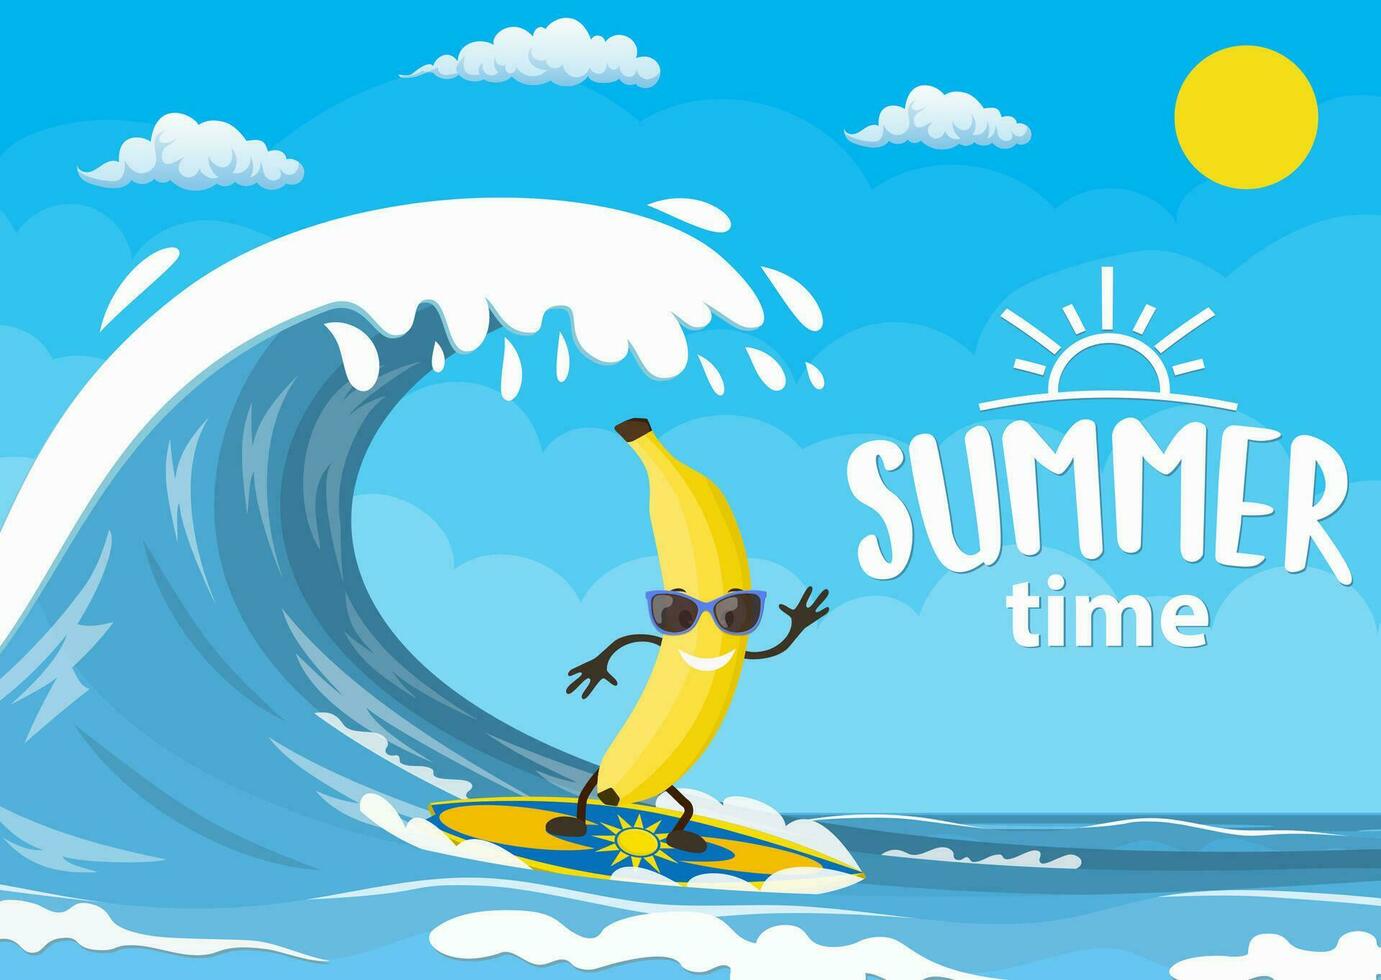 banana characters surfing on wave. Holidays on the sea. Beach activities. Summer time. Vector illustration in flat style